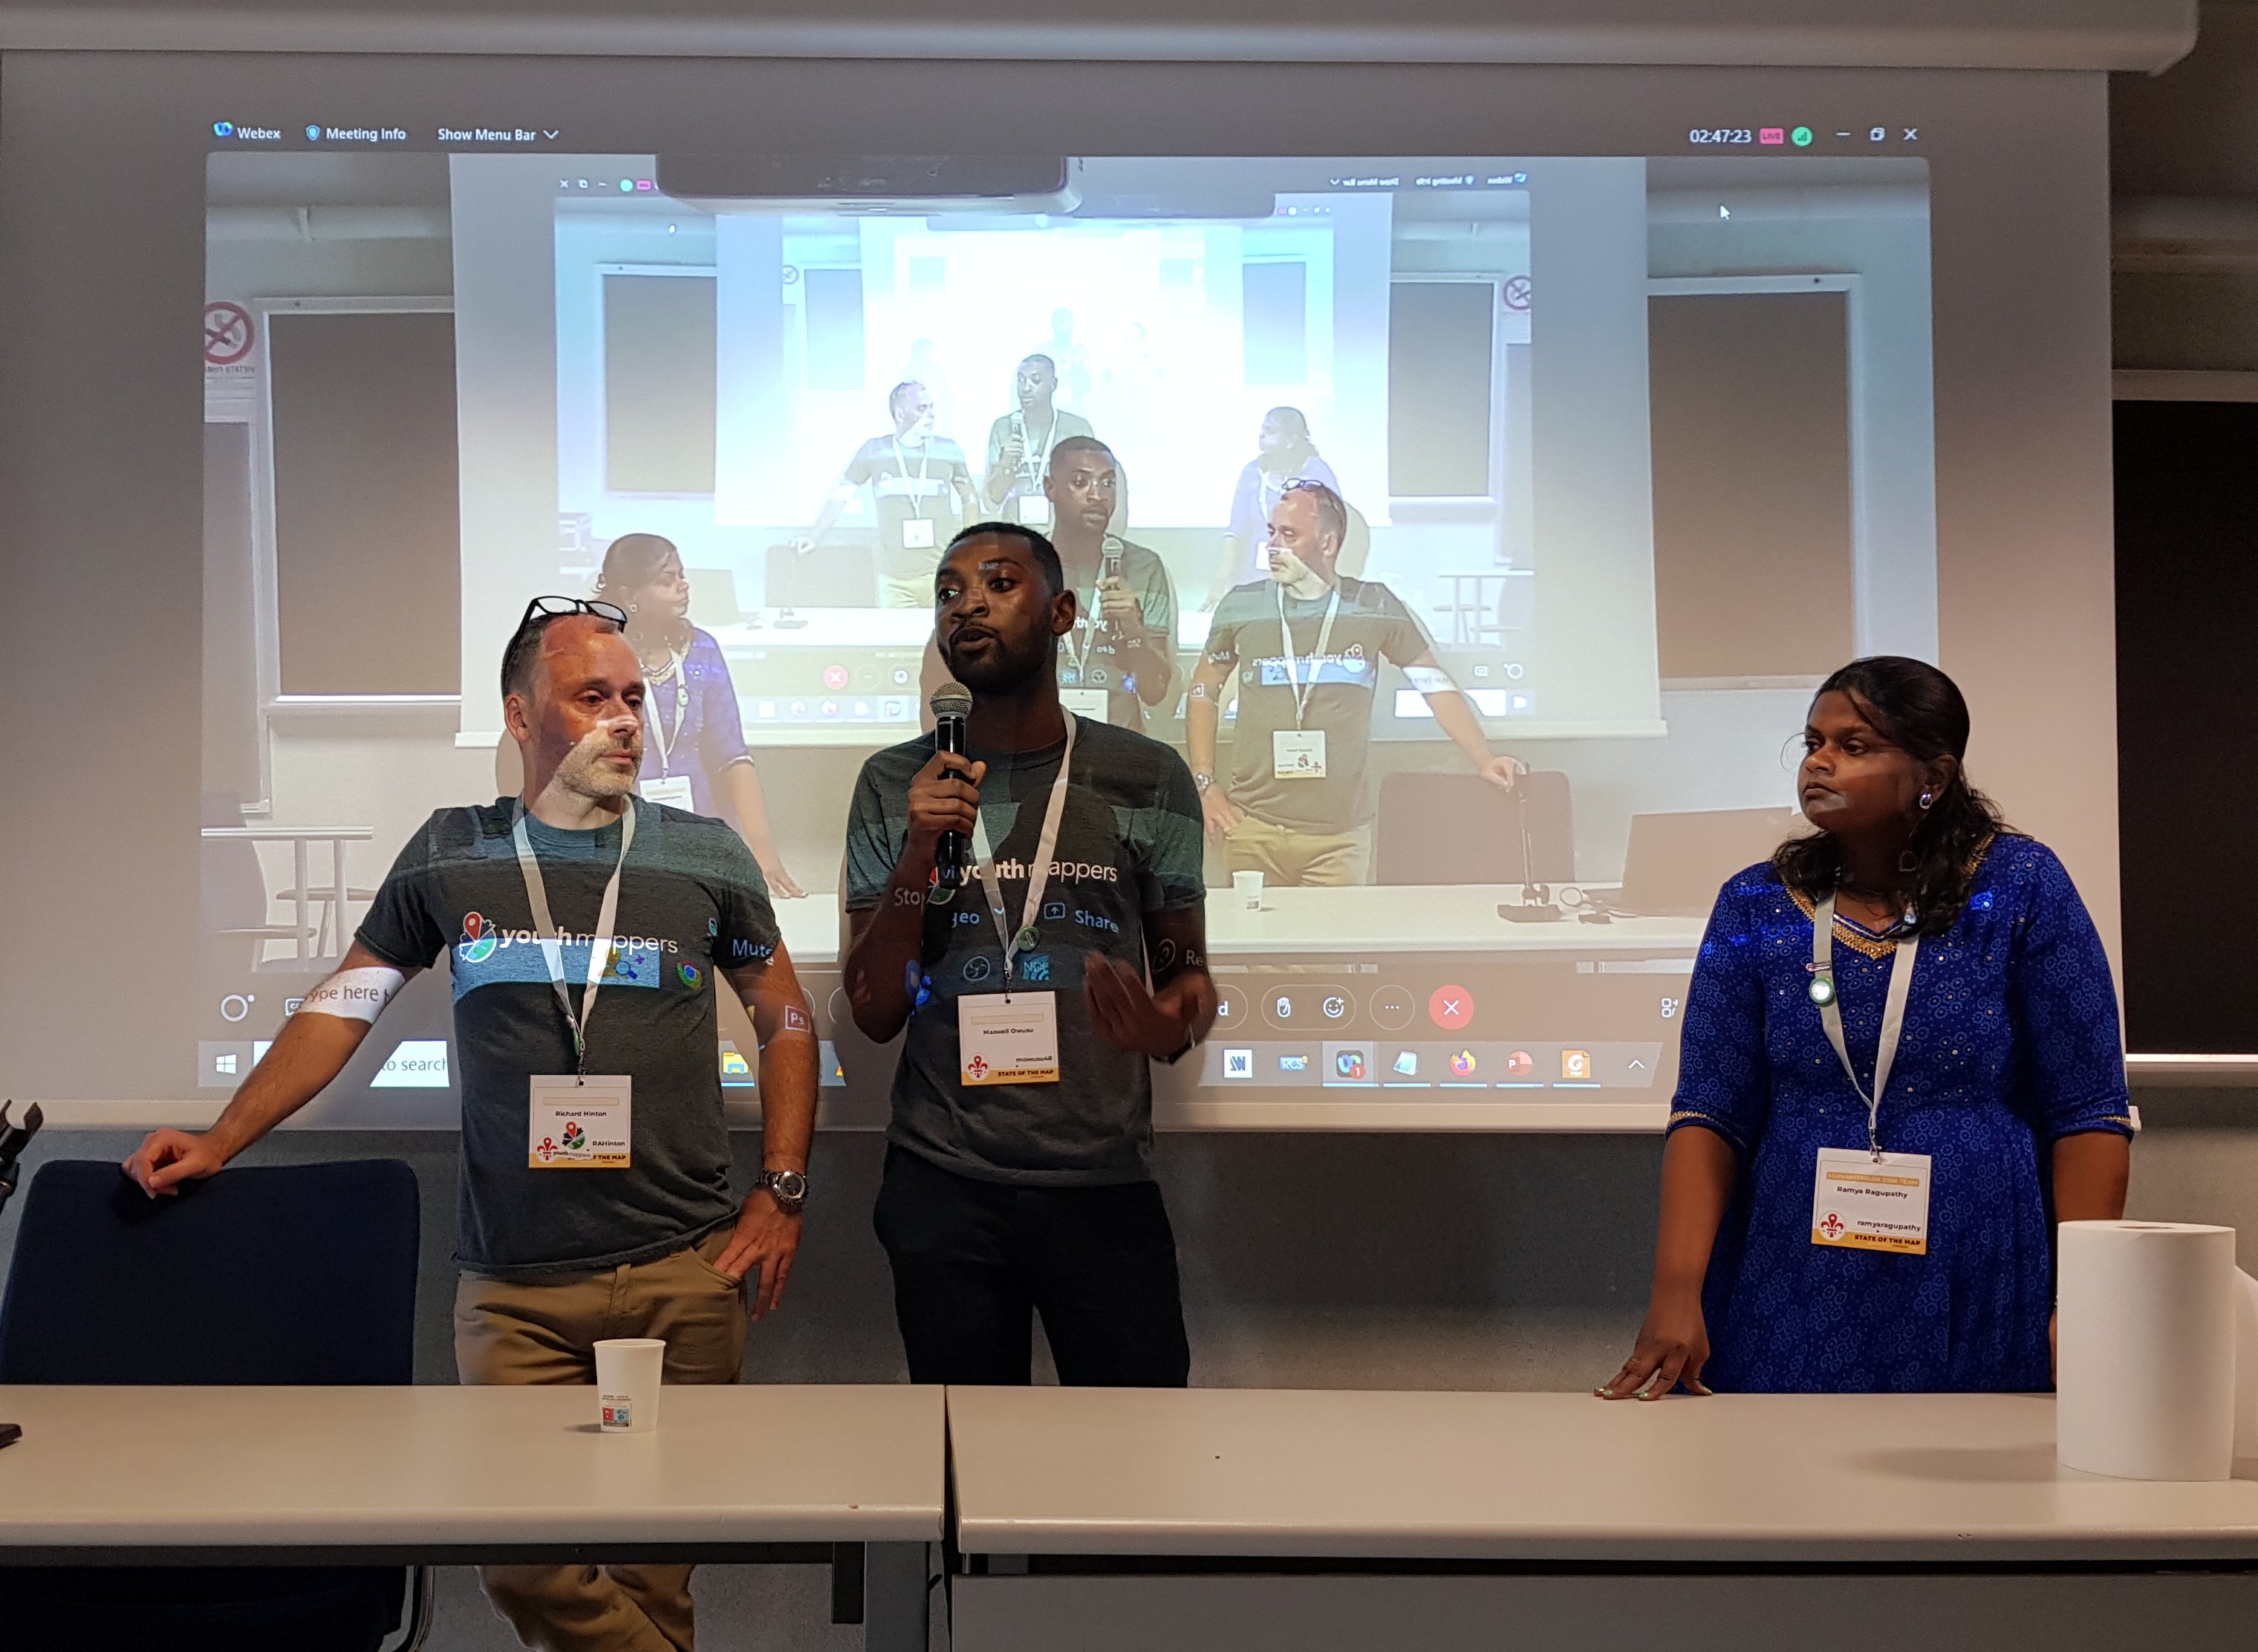 Presenters from the HOT unSummit Humanitarian Sessions at SotM 2022 receiving questions